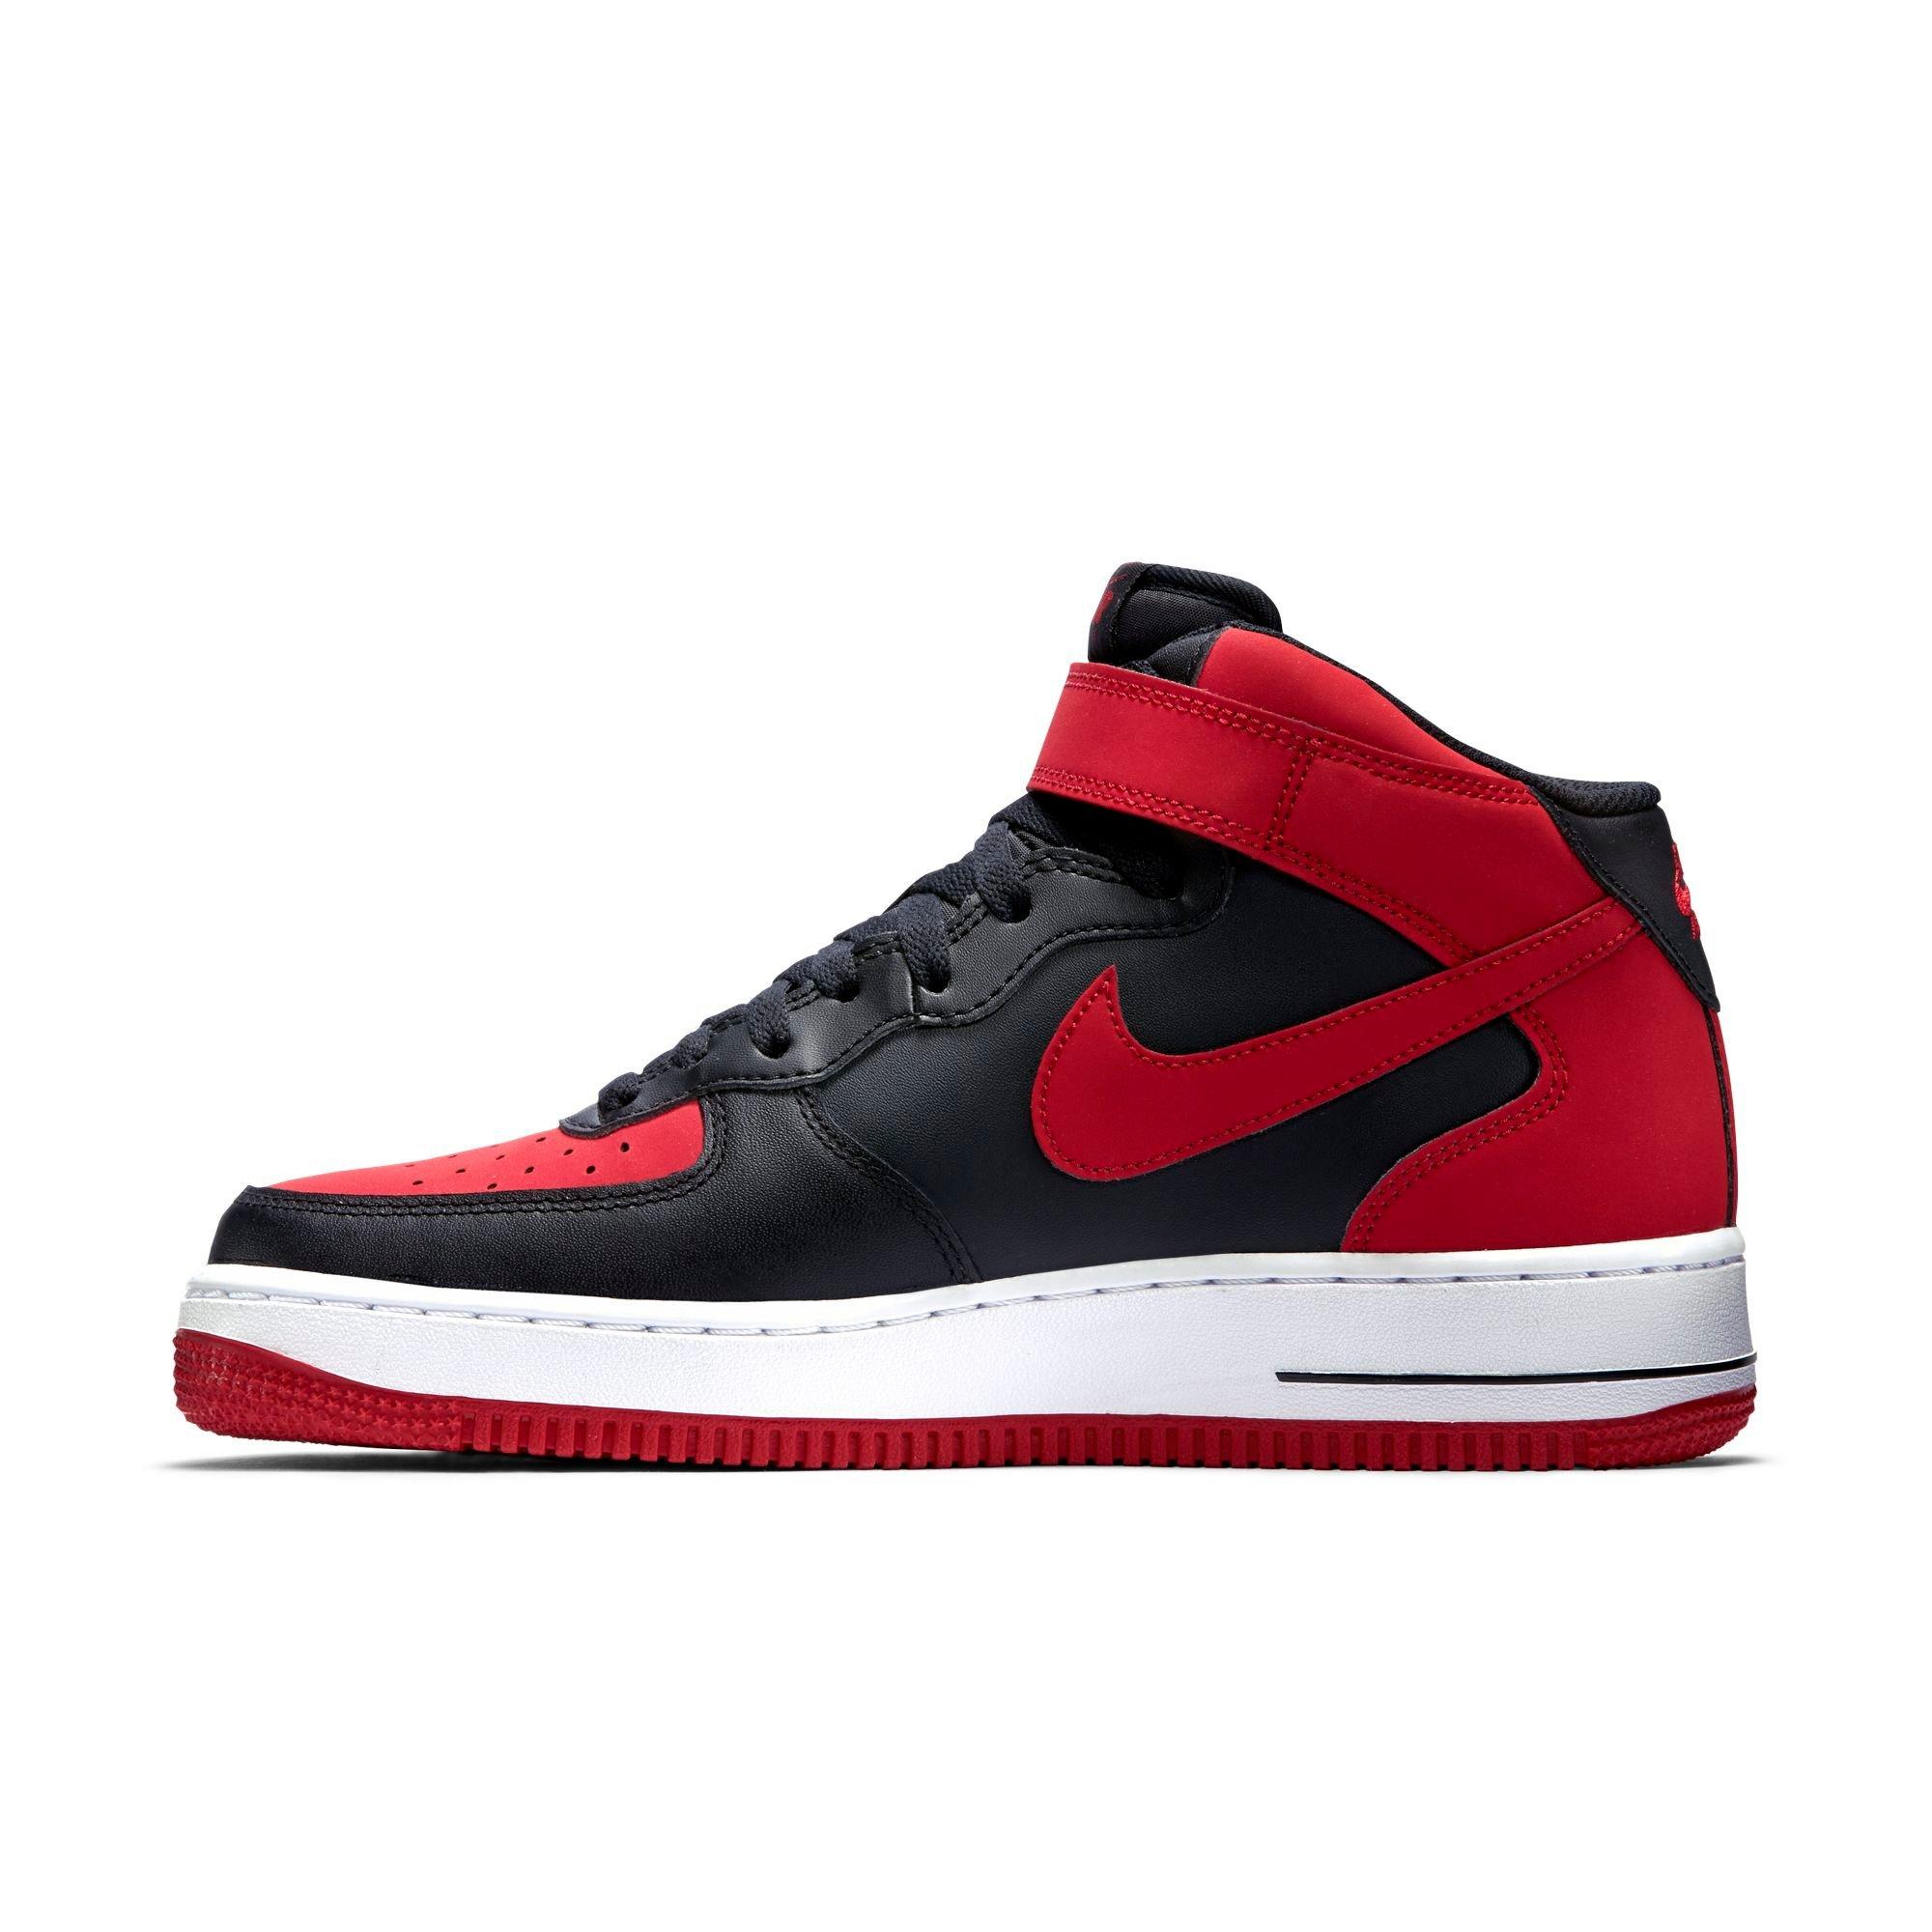 red high top forces